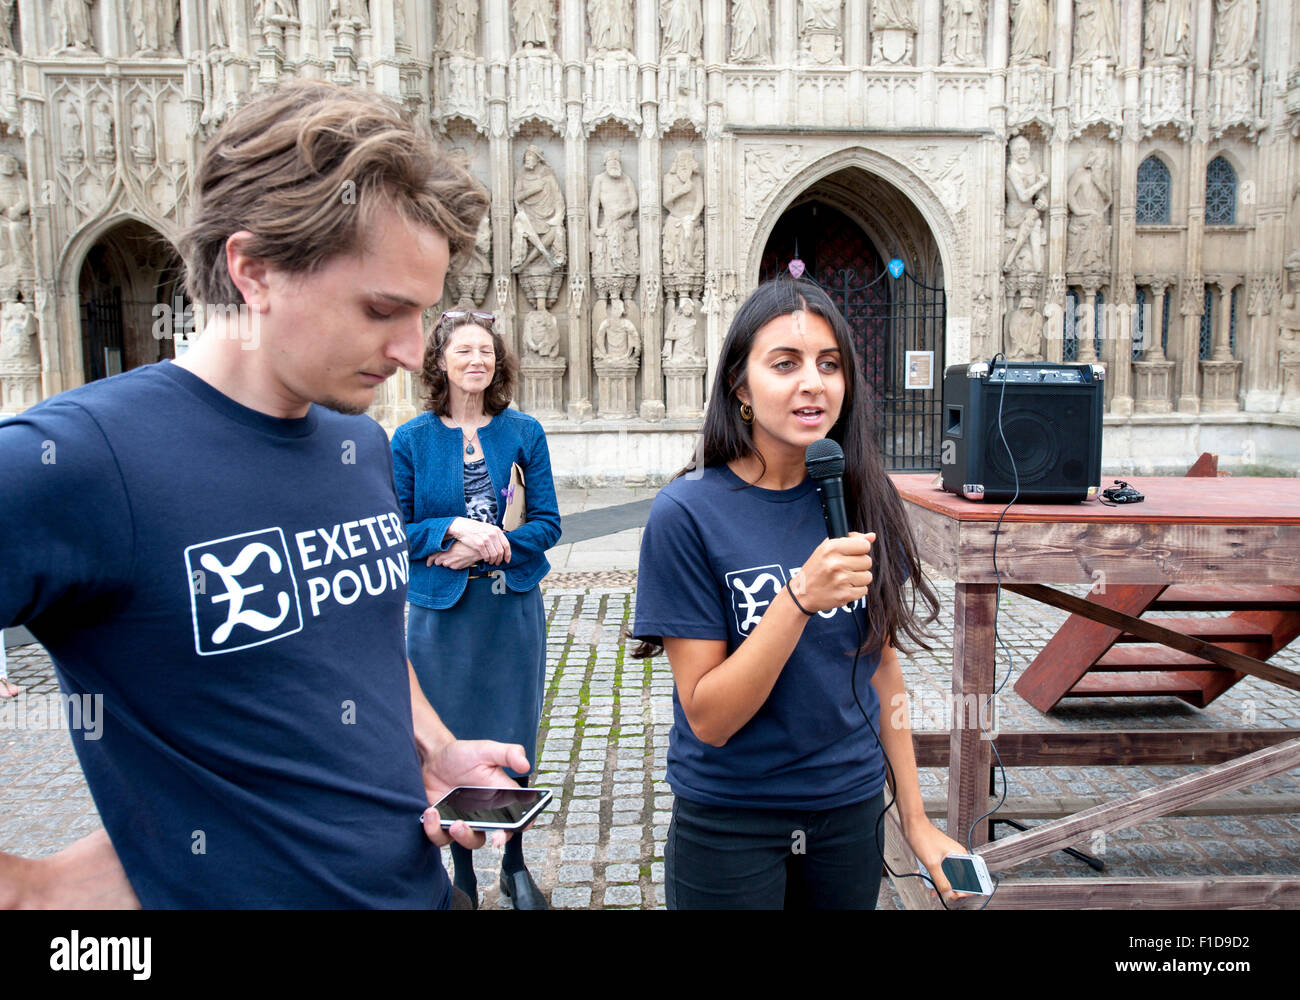 Exeter, Devon, UK. 1st September, 2015. during the Exeter Pound launch at Exeter Cathedral on 1st September 2015 in Exeter, England, UK Credit:  Clive Chilvers/Alamy Live News Stock Photo